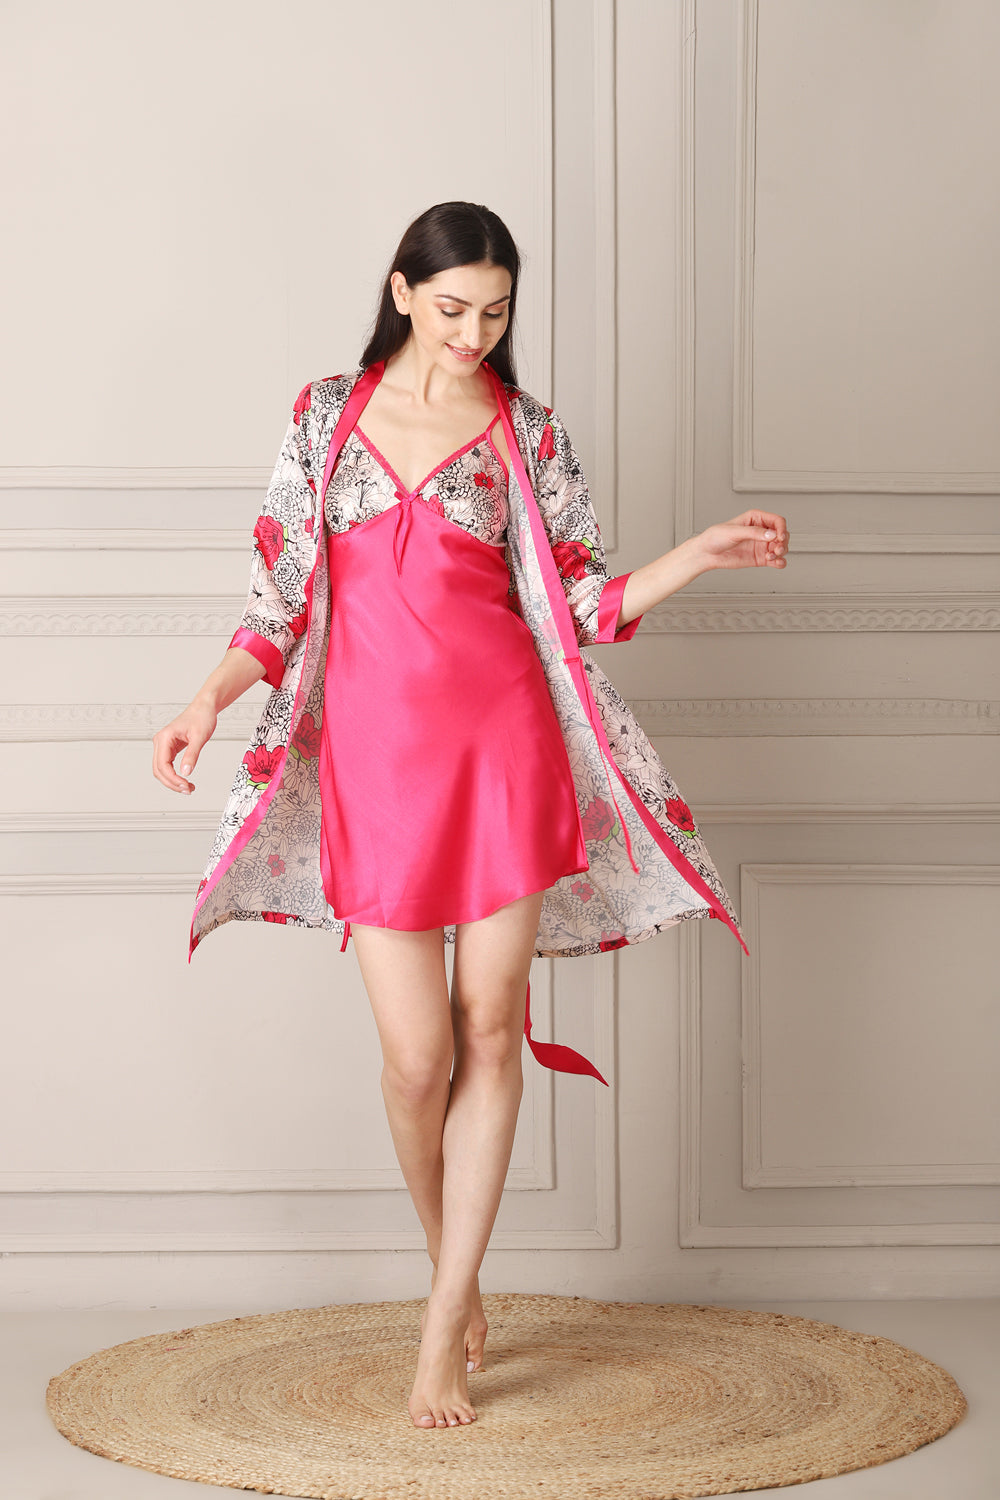 Printed Satin Short Nightgown set Private Lives